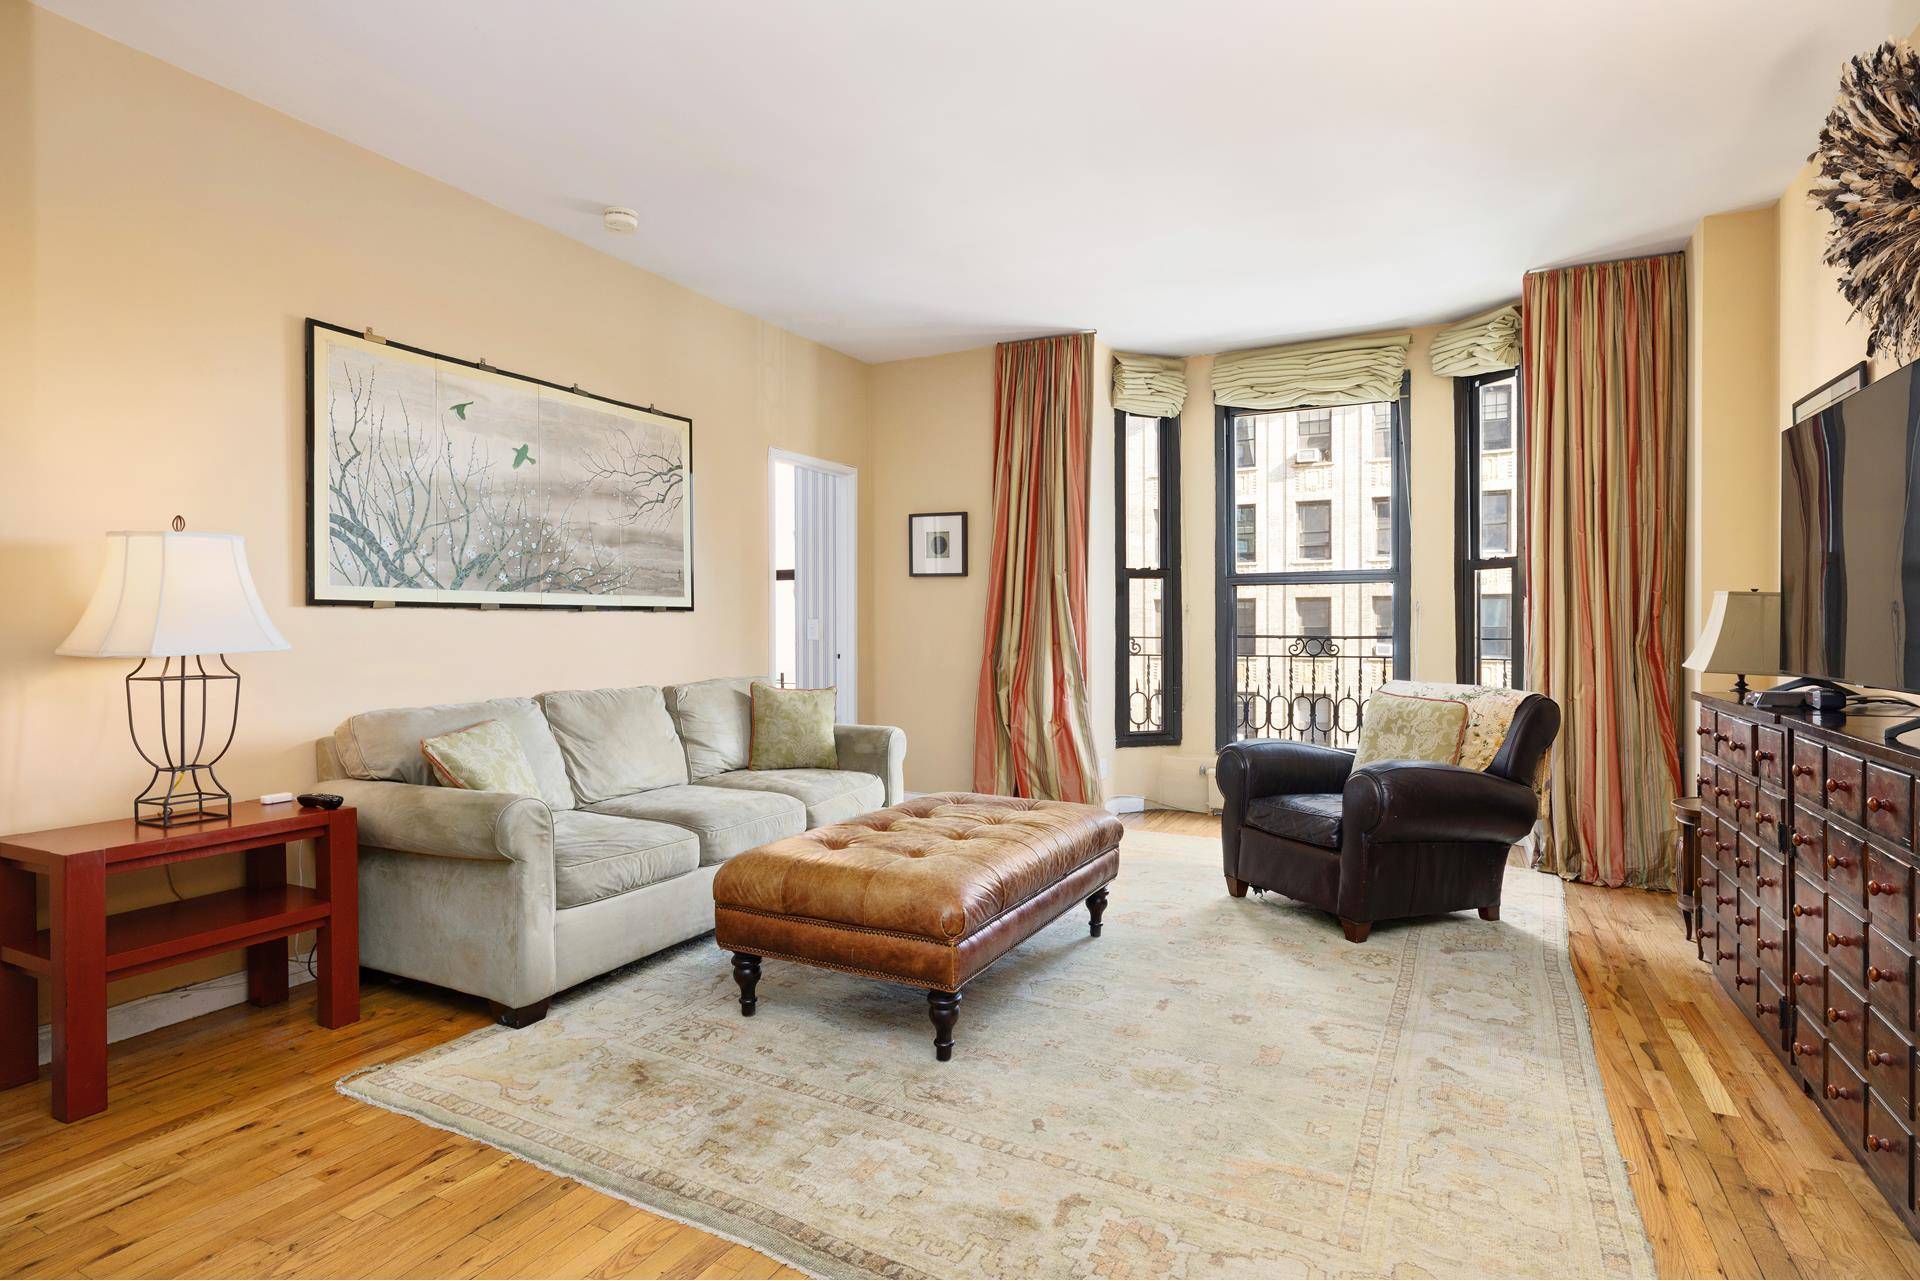 Located on one of the Upper West Side's greatest cross streets, 112 West 72nd Street 7BC is a charming 3 bedroom 2 bath in the landmarked former Hargrave Hotel.